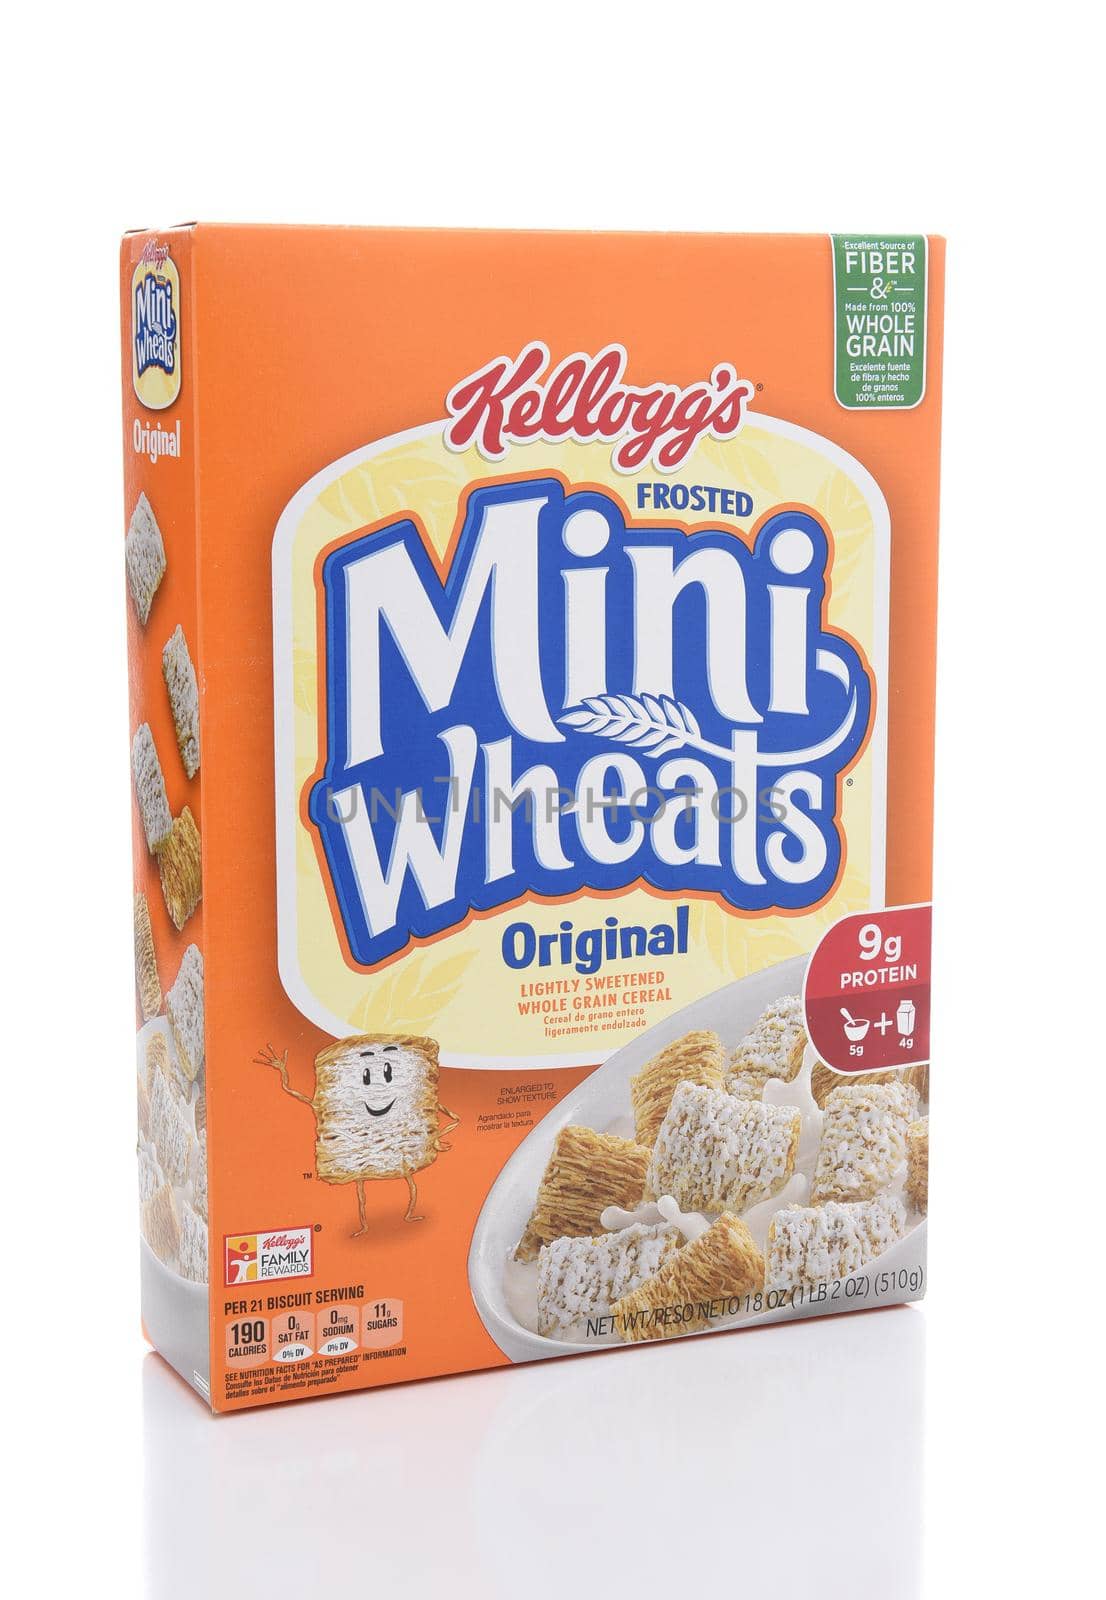 IRVINE, CALIFORNIA - JULY 10, 2017: Kelloggs Frosted Mini-Wheats. The shredded wheat cereal is coated with a sweet sugary frosting.